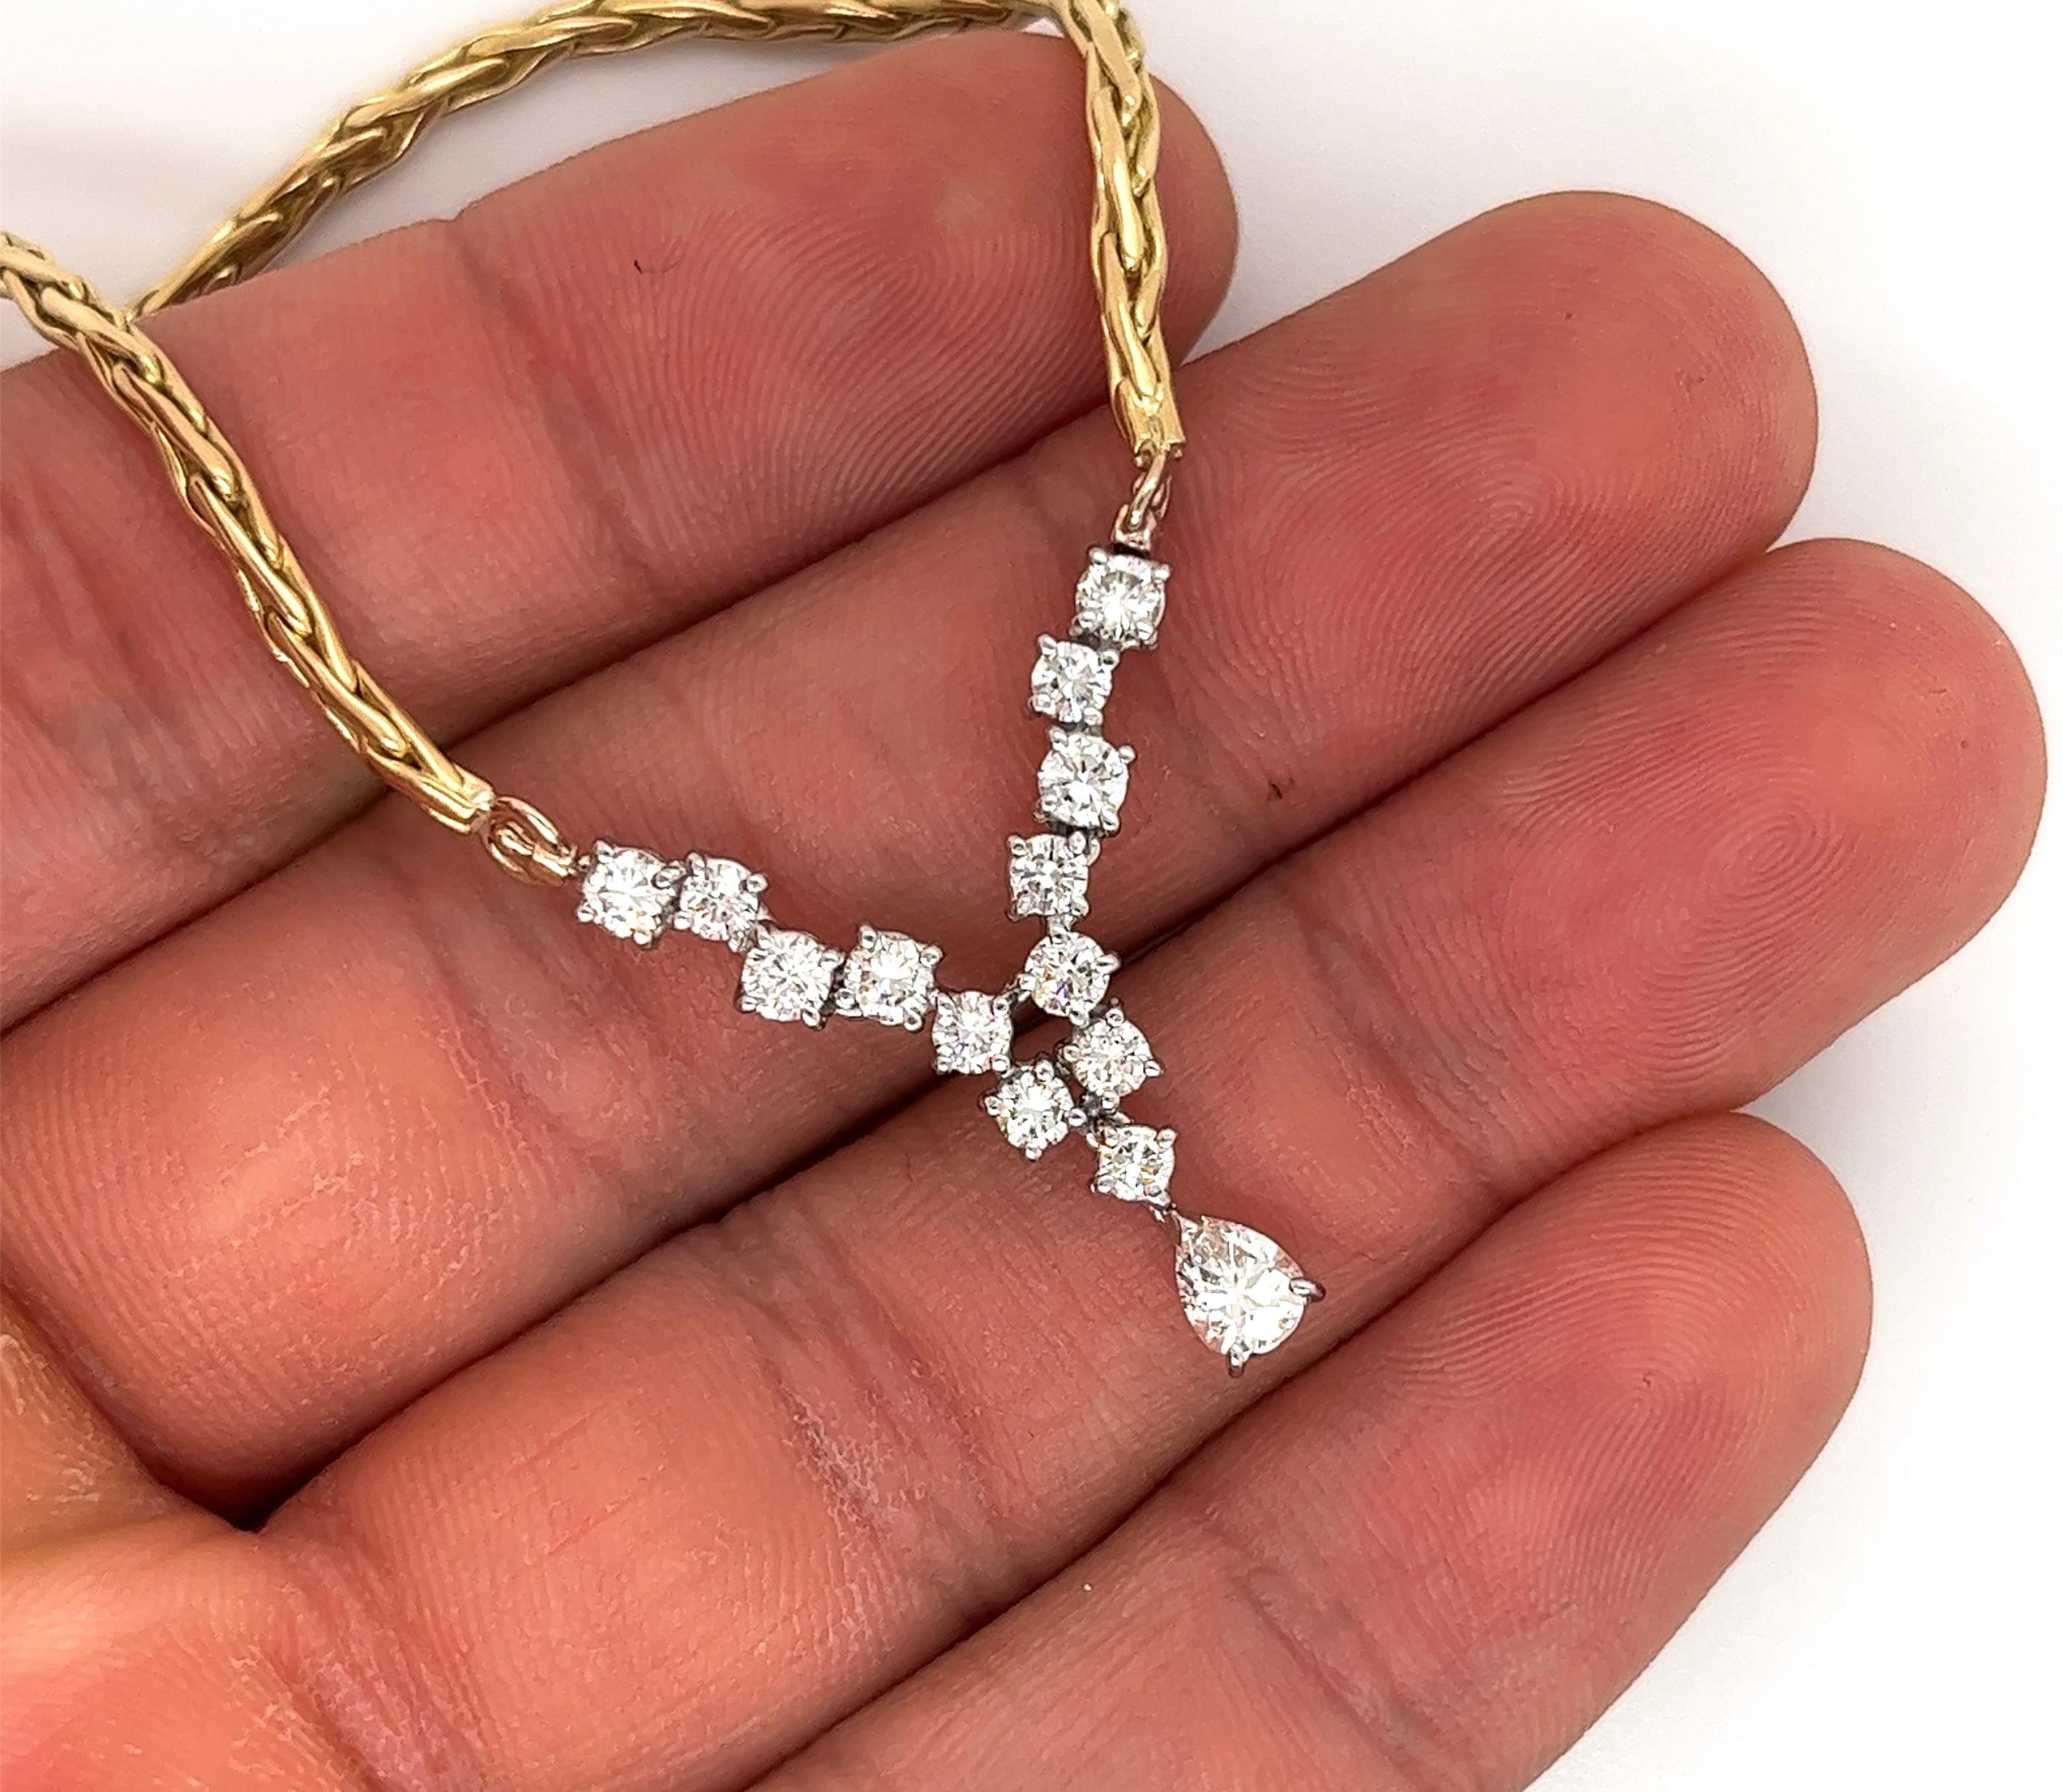 18-karat gold wheat-style choker chain sets 1.55 carats in pear and round cut natural diamonds. Handmade with a secure box closure and additional safety clip. 
Made in 2-tone with a yellow gold chain and white gold mounting for the diamonds. The